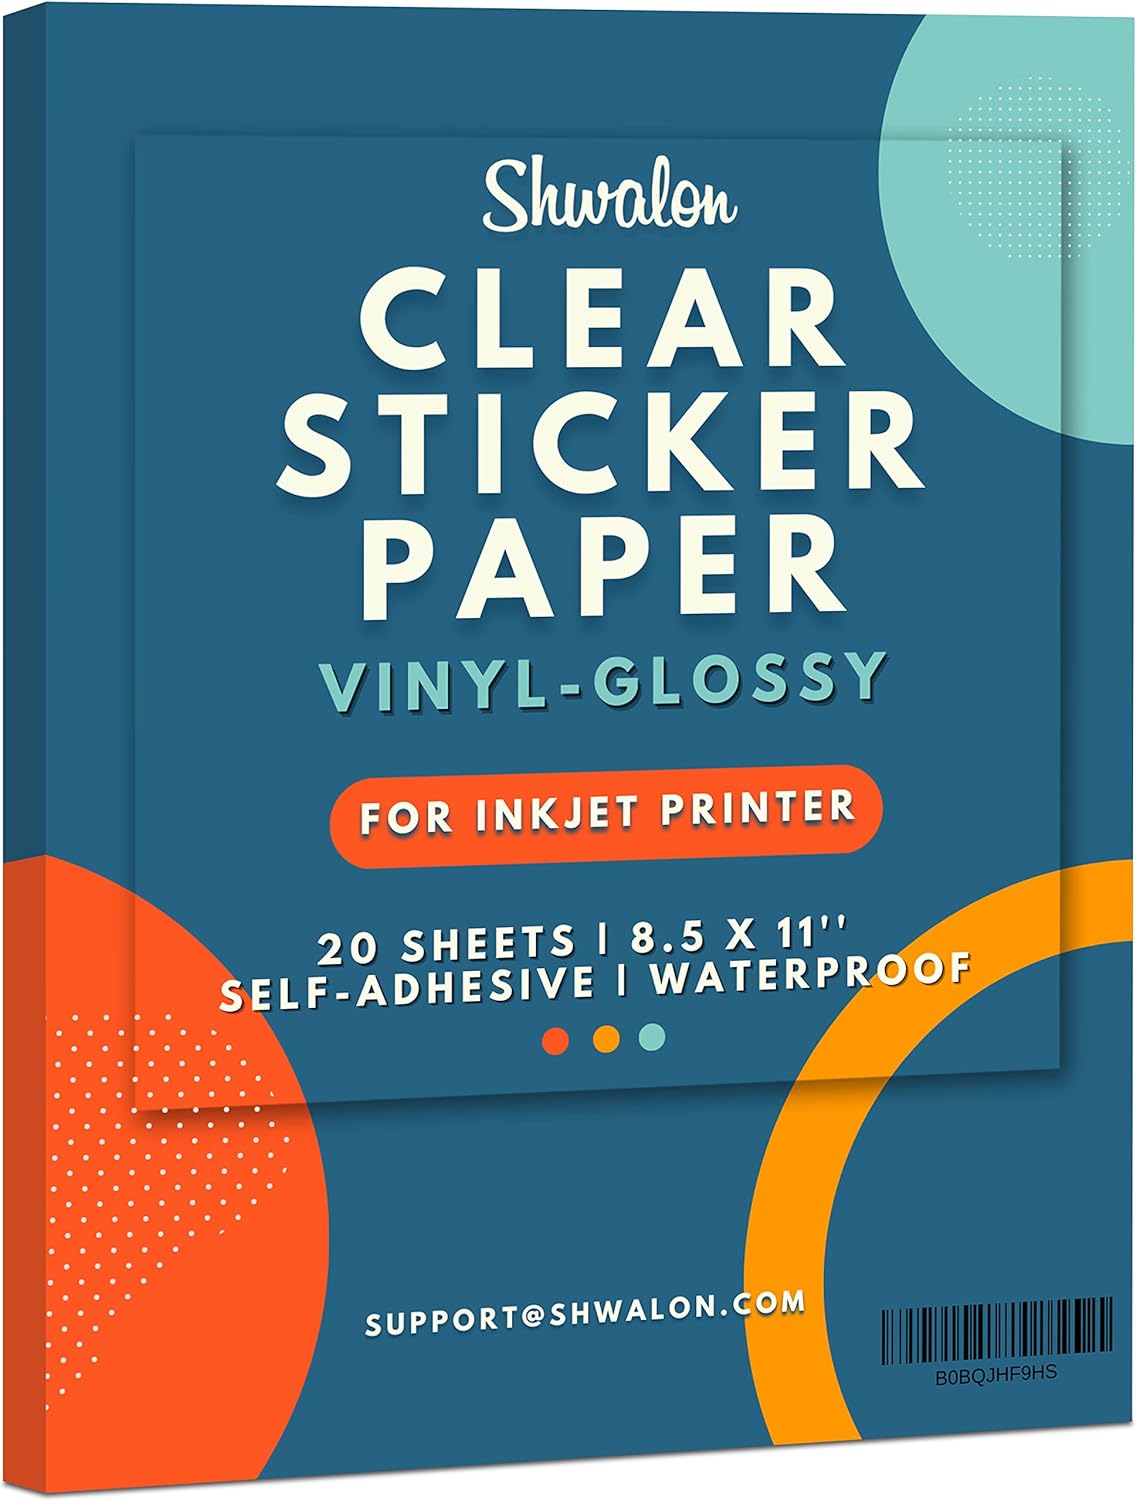 A-SUB Clear Sticker Paper for Inkjet Printers - Waterproof Transparent  Printable Vinyl Sticker Paper - 15 Sheets 8.5x11 Inch Glossy Clear Label  Paper